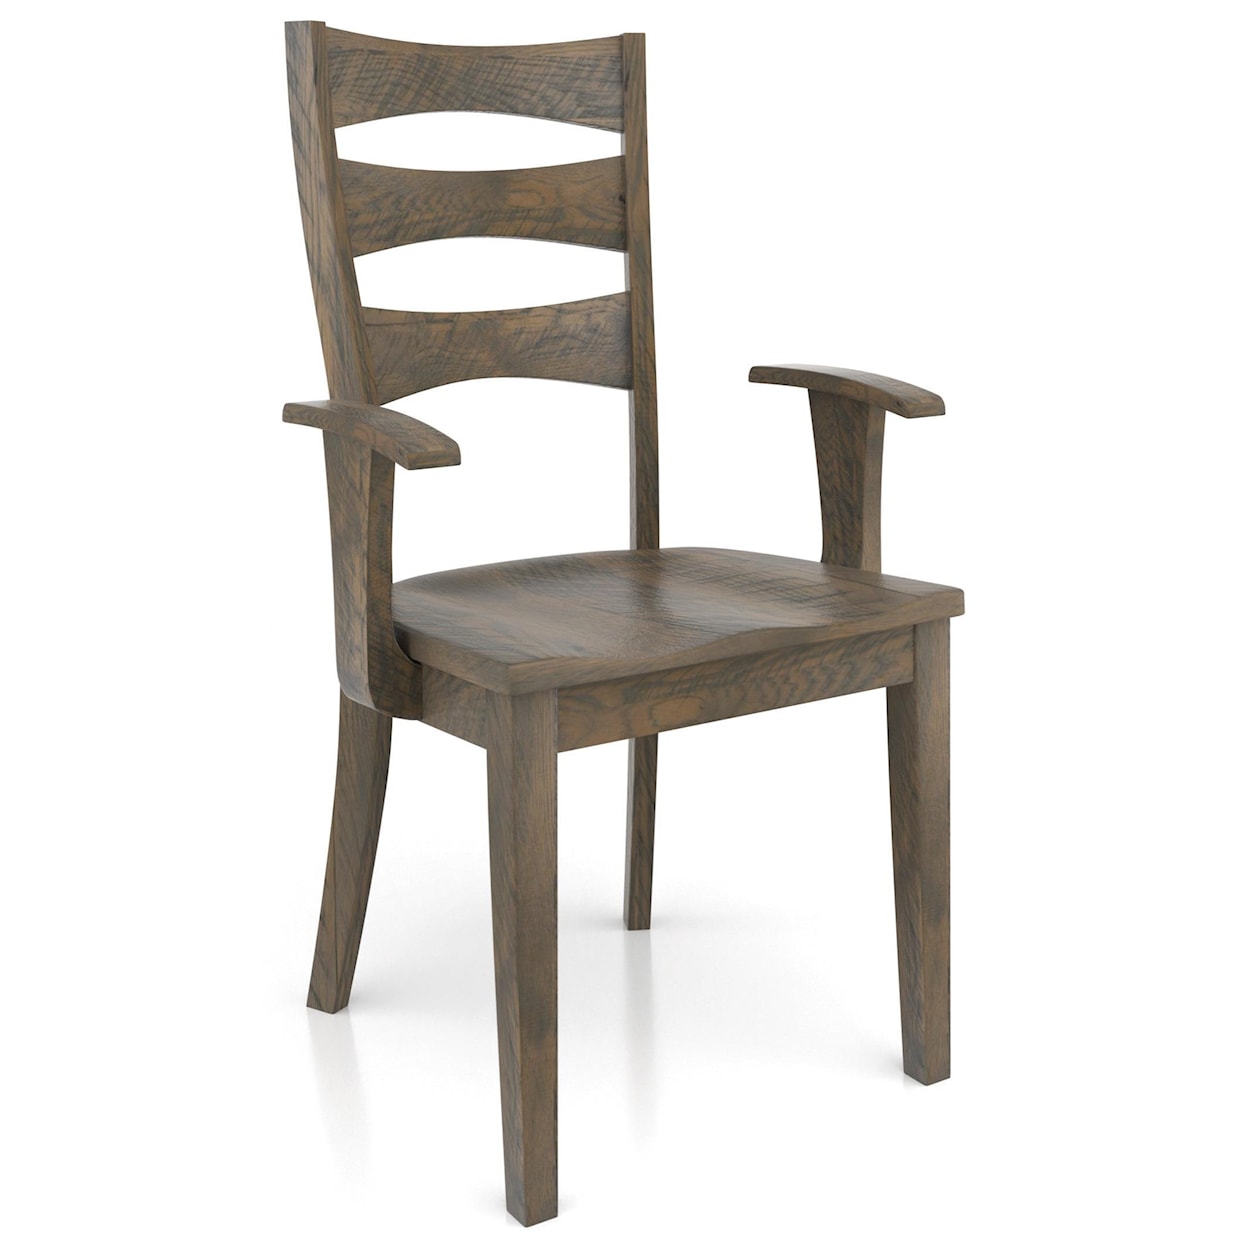 Wengerd Wood Products Kingsville Arm Chair